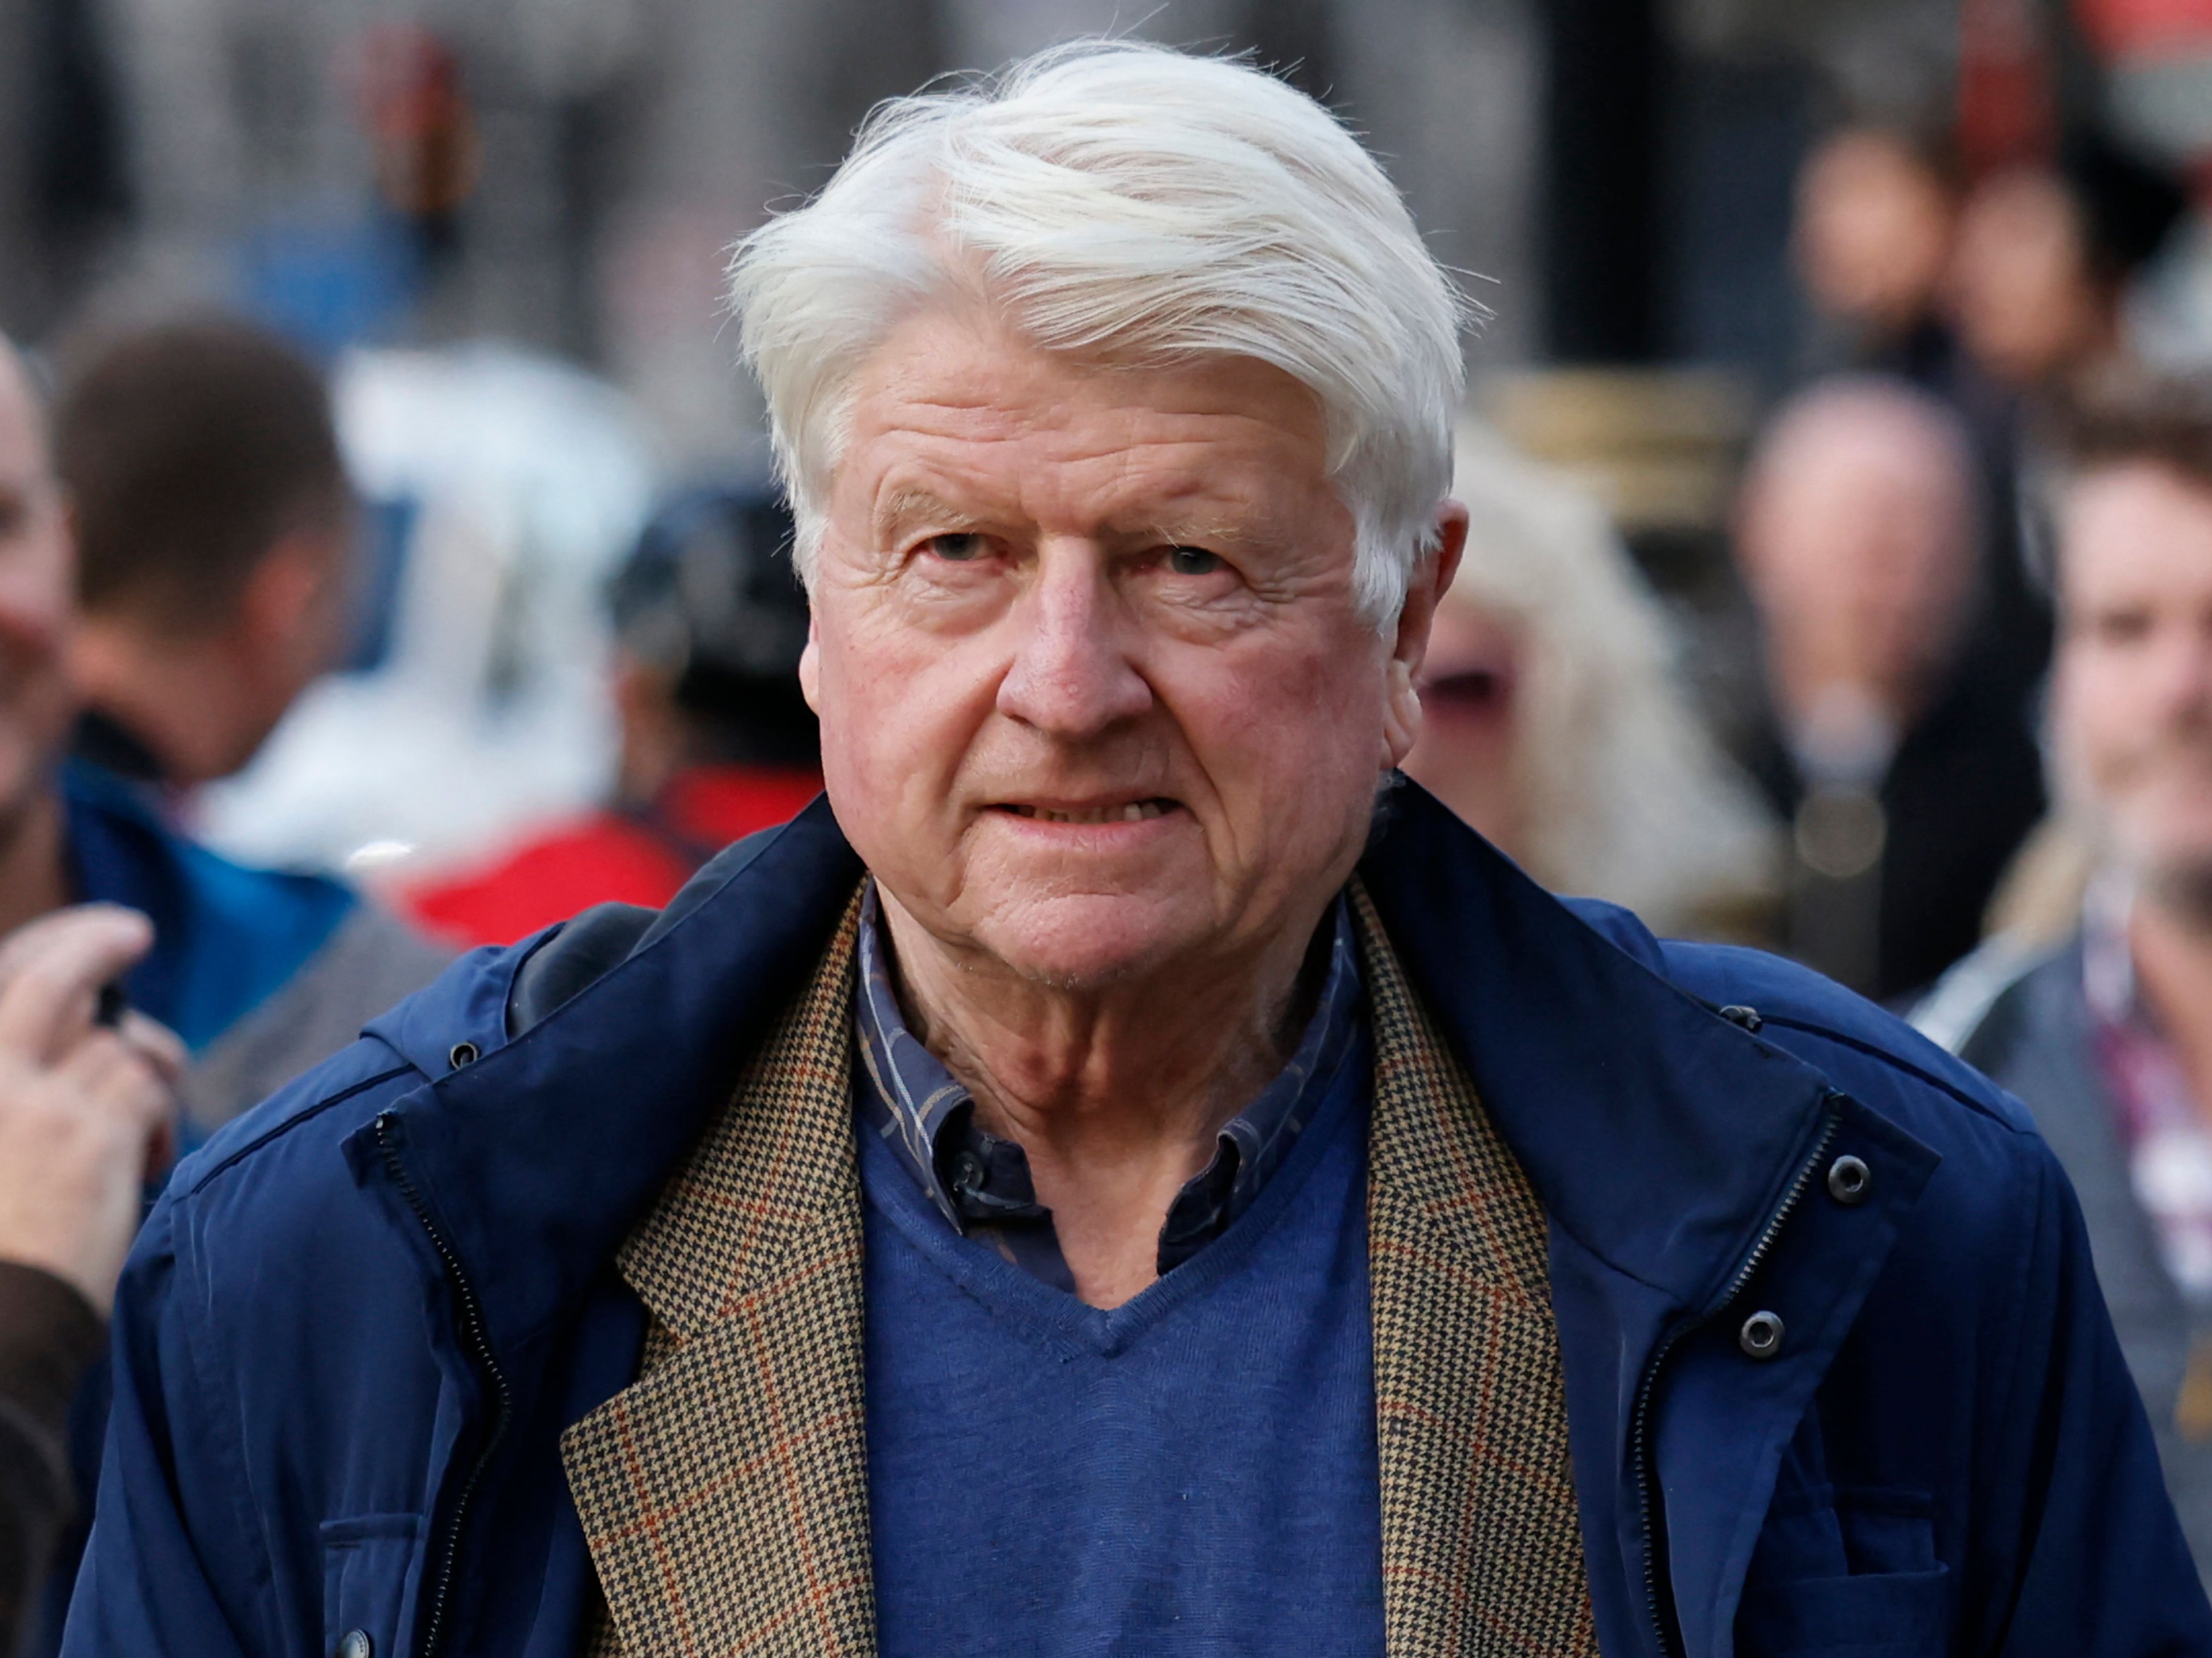 Stanley Johnson has been accused of inappropriate touching